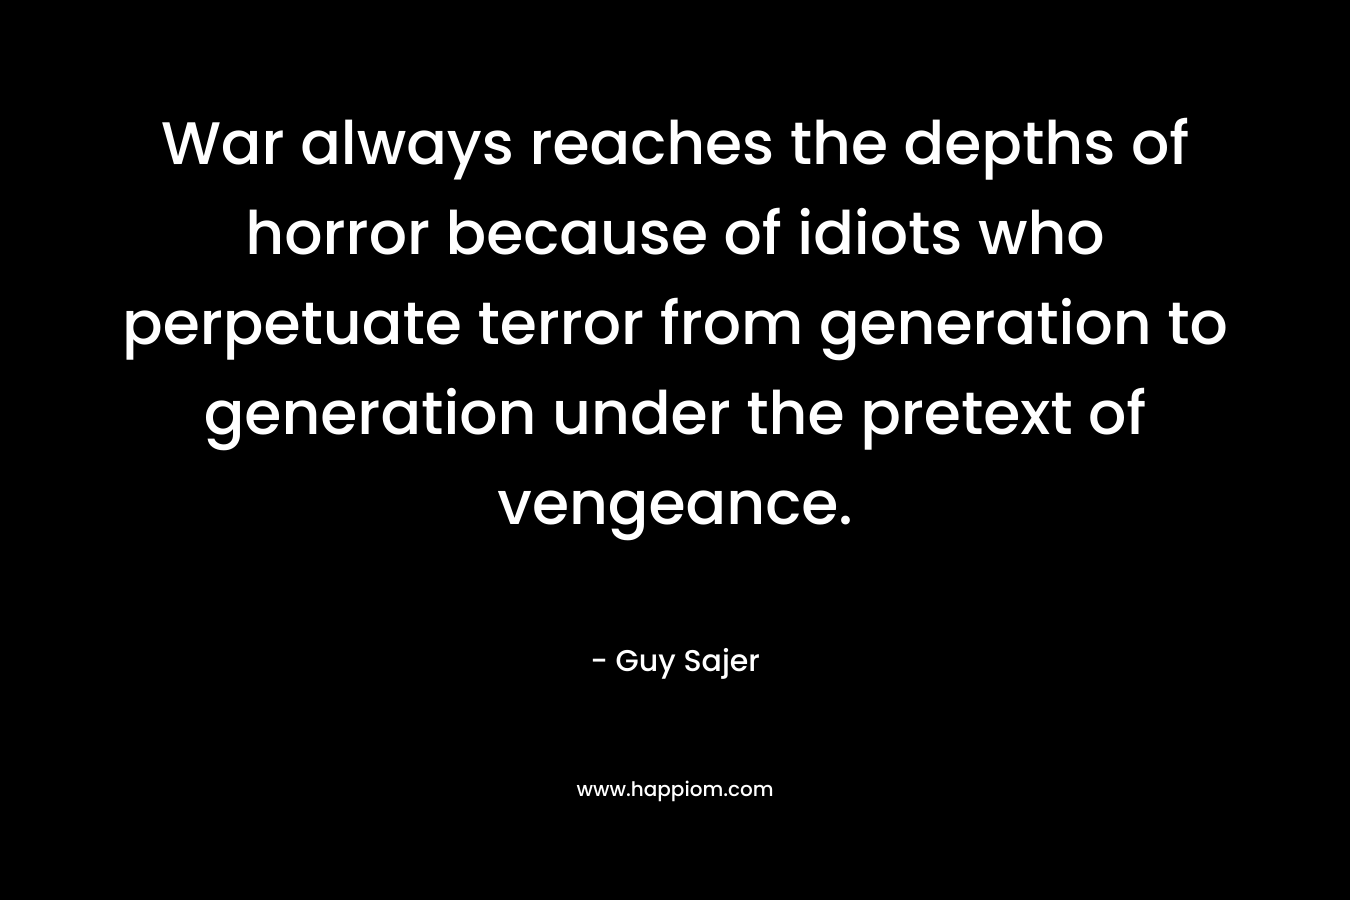 War always reaches the depths of horror because of idiots who perpetuate terror from generation to generation under the pretext of vengeance. – Guy Sajer